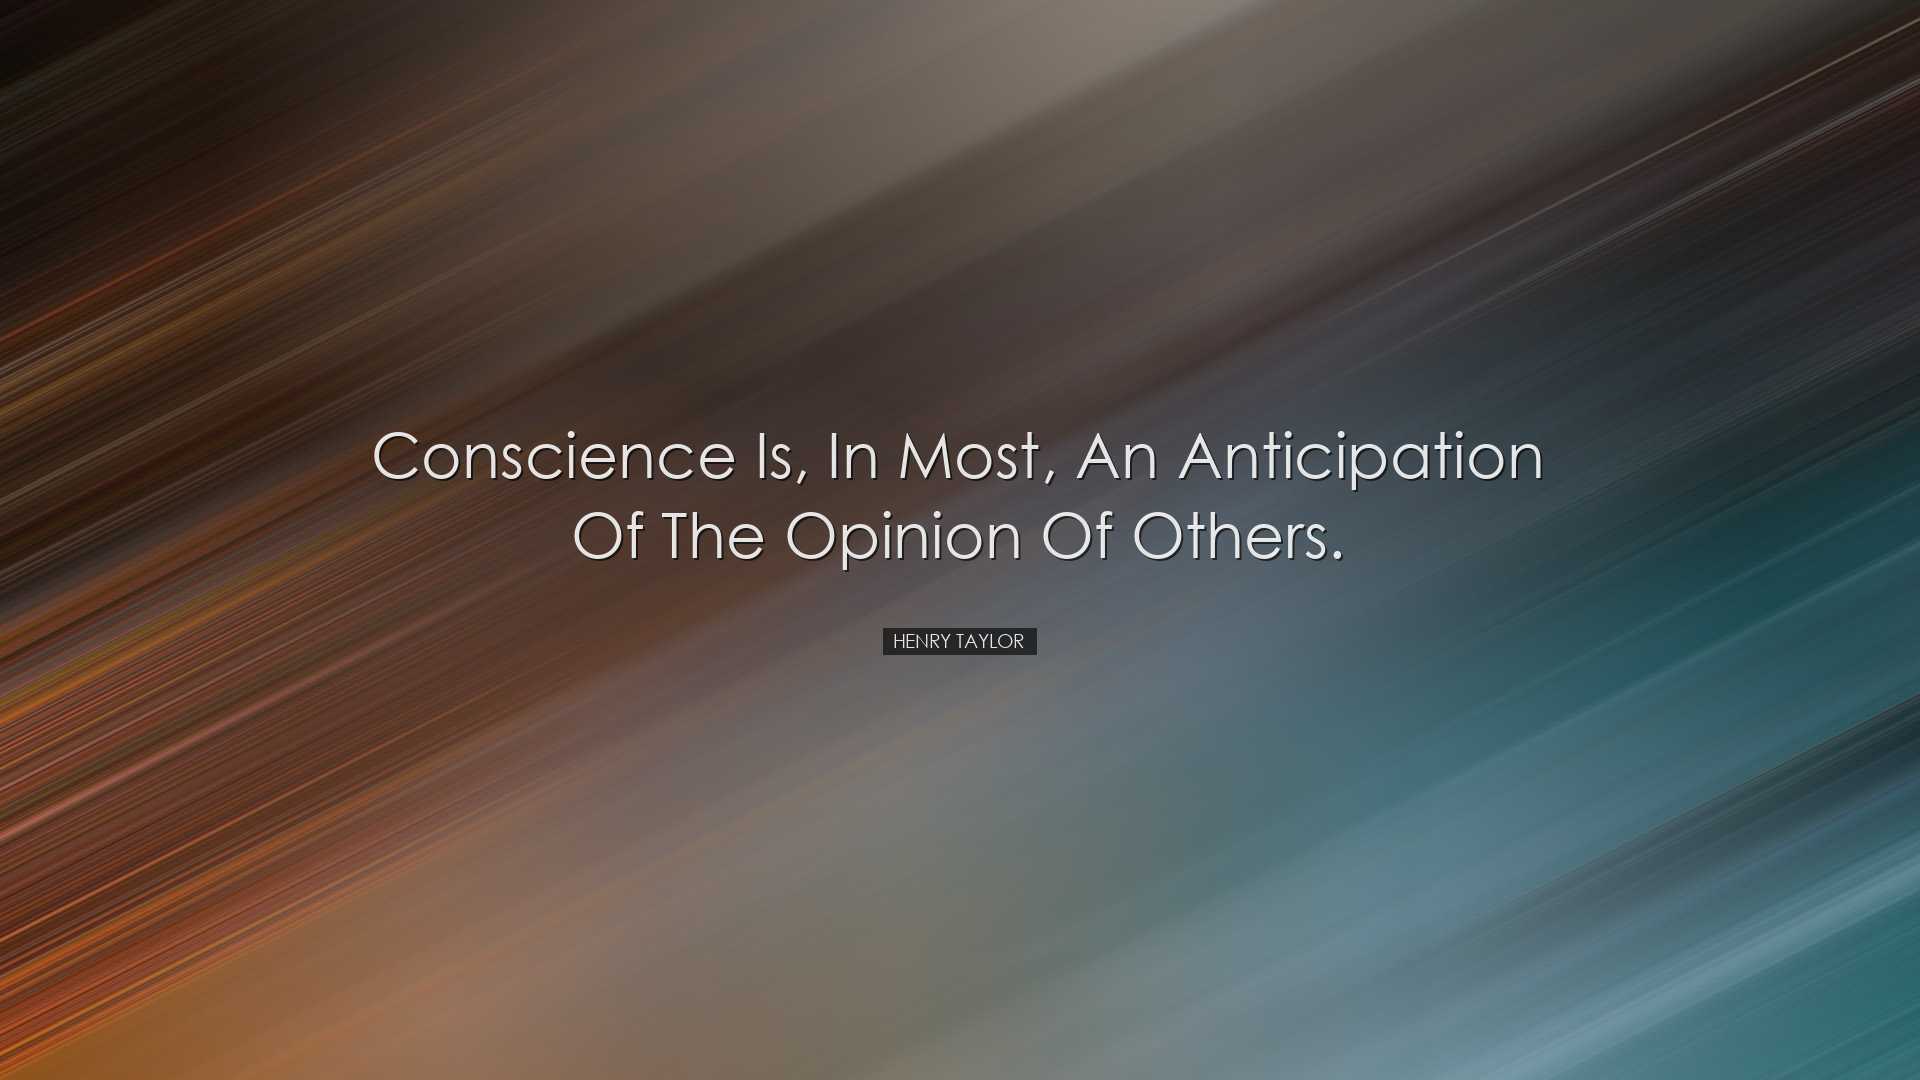 Conscience is, in most, an anticipation of the opinion of others.